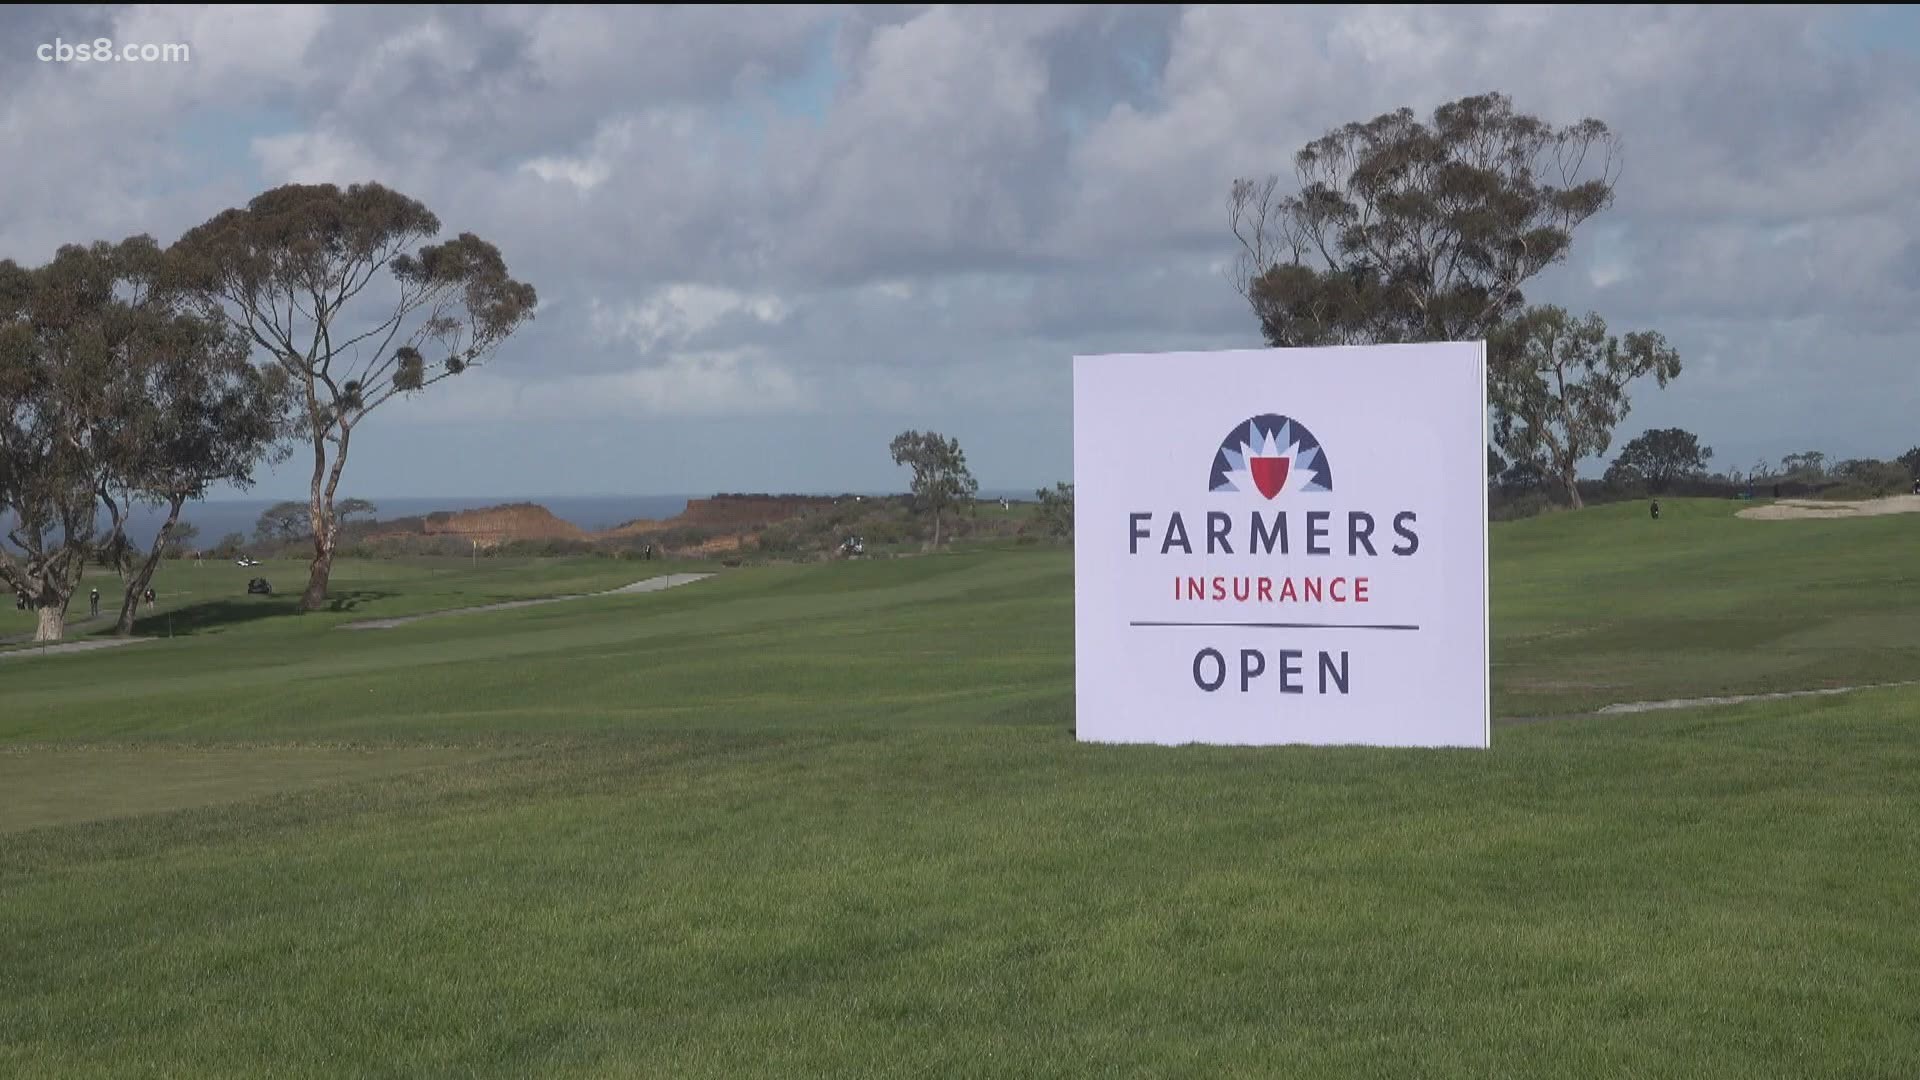 Rain forecast for second round of Farmers Insurance Open cbs8